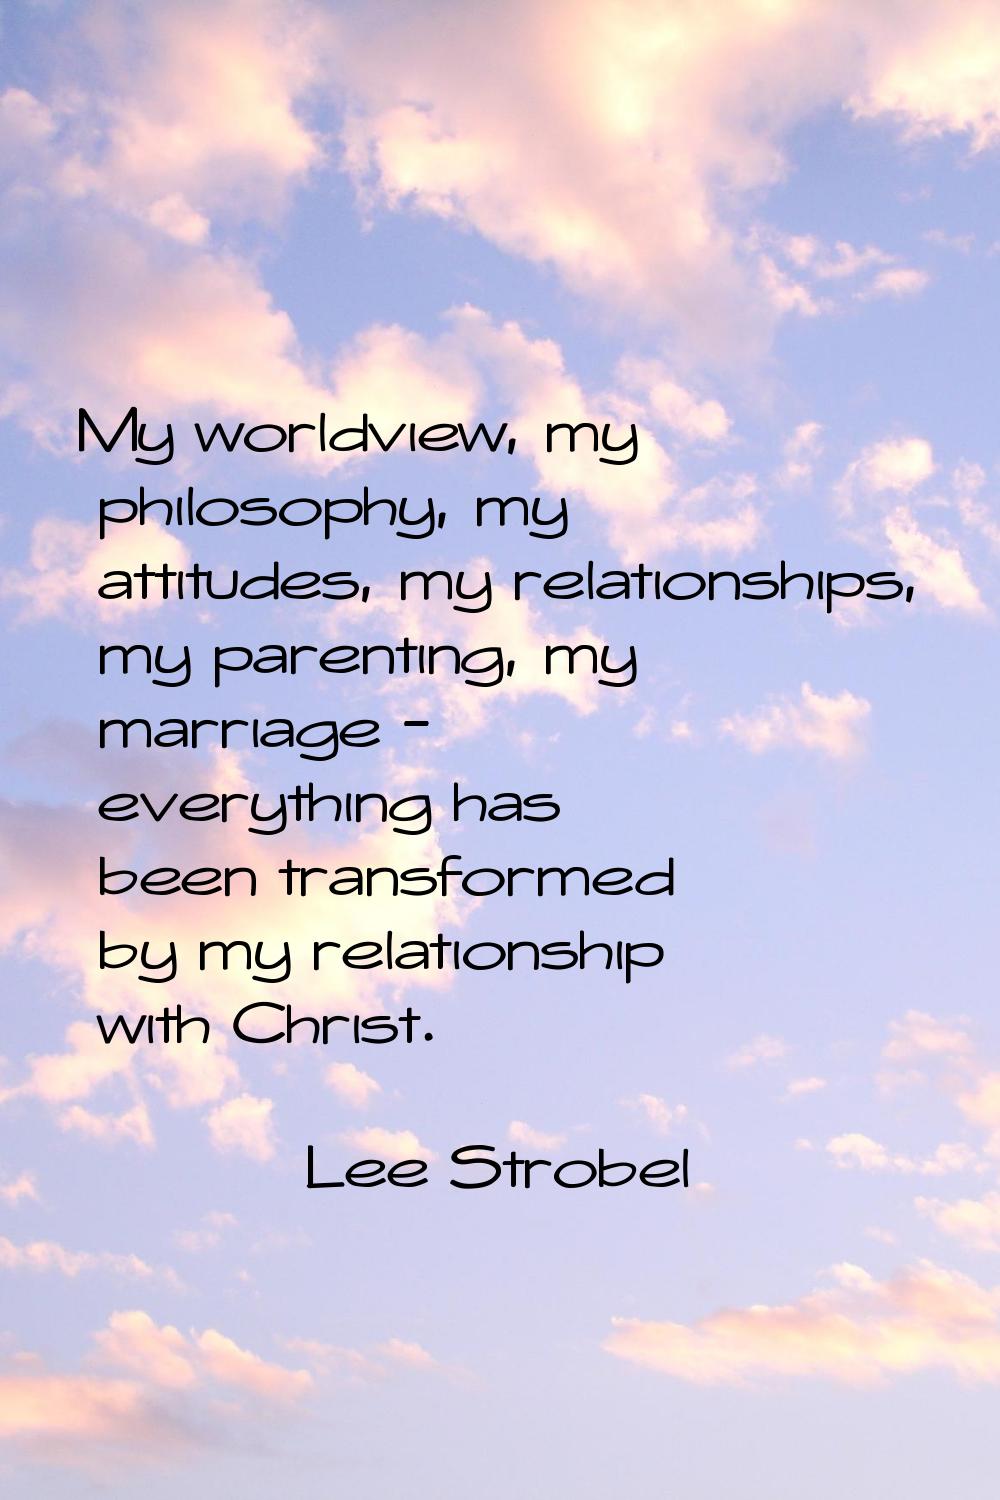 My worldview, my philosophy, my attitudes, my relationships, my parenting, my marriage - everything